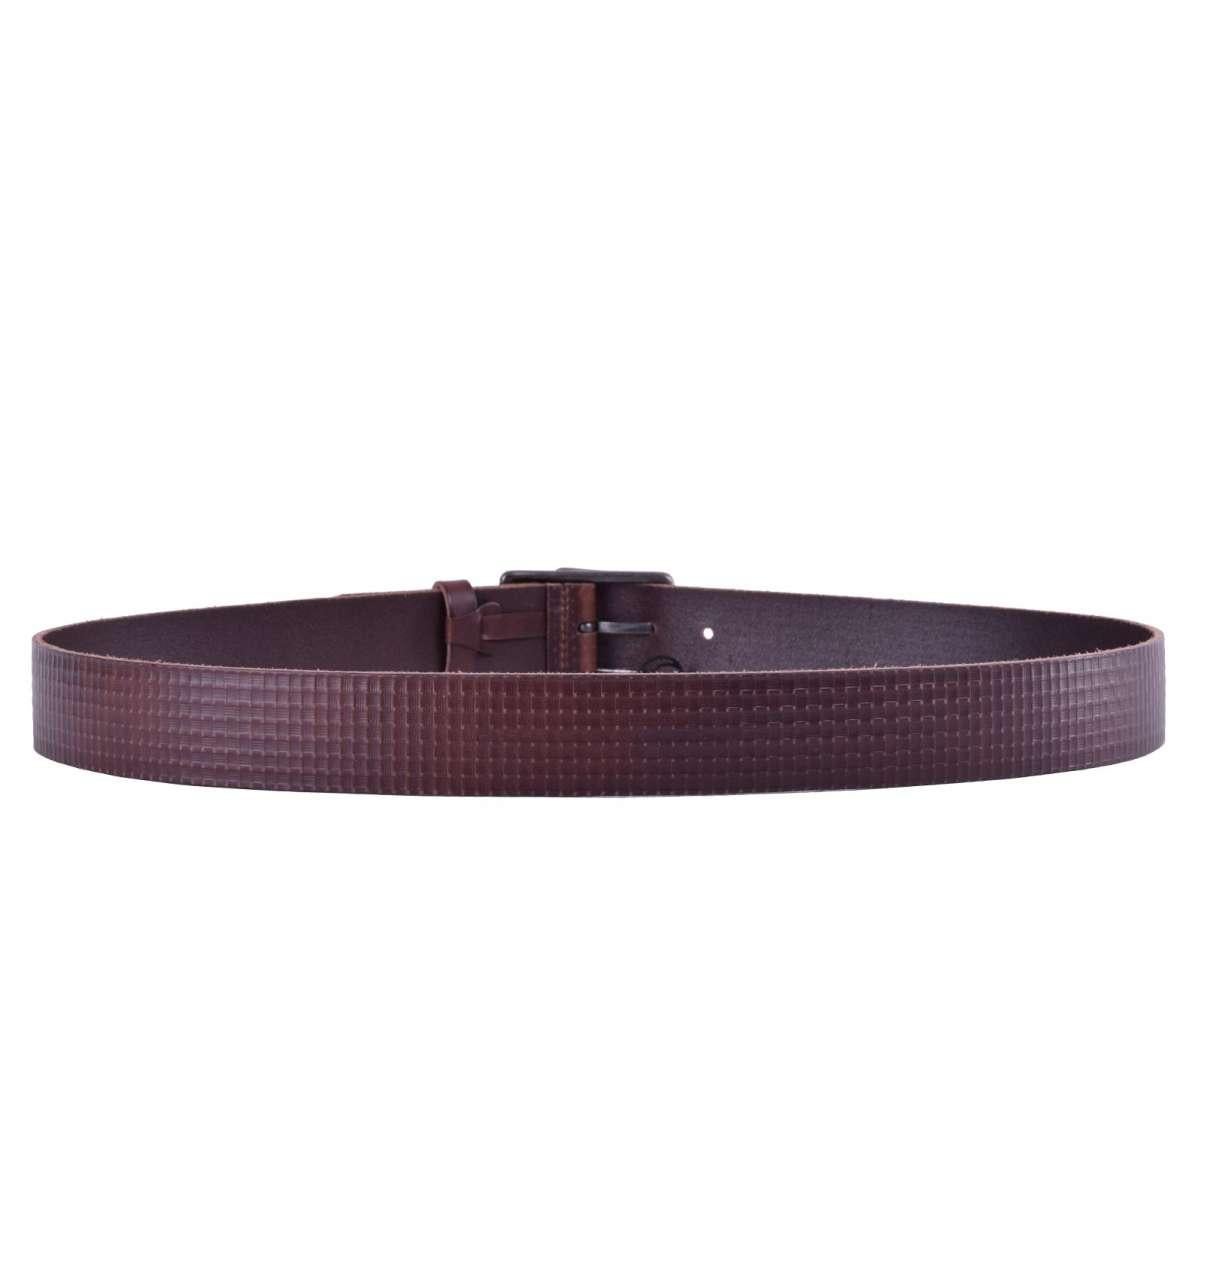 - Calf leather belt with check print & logo by DOLCE & GABBANA Black Label - MADE IN ITALY - New with Box or Dustbag - Former RRP (US): USD 495 - Model: BC3878-A1468-80048 - Material: 100% Calf Leather - Width: 3,5 cm - Color: Brown - Buckle with